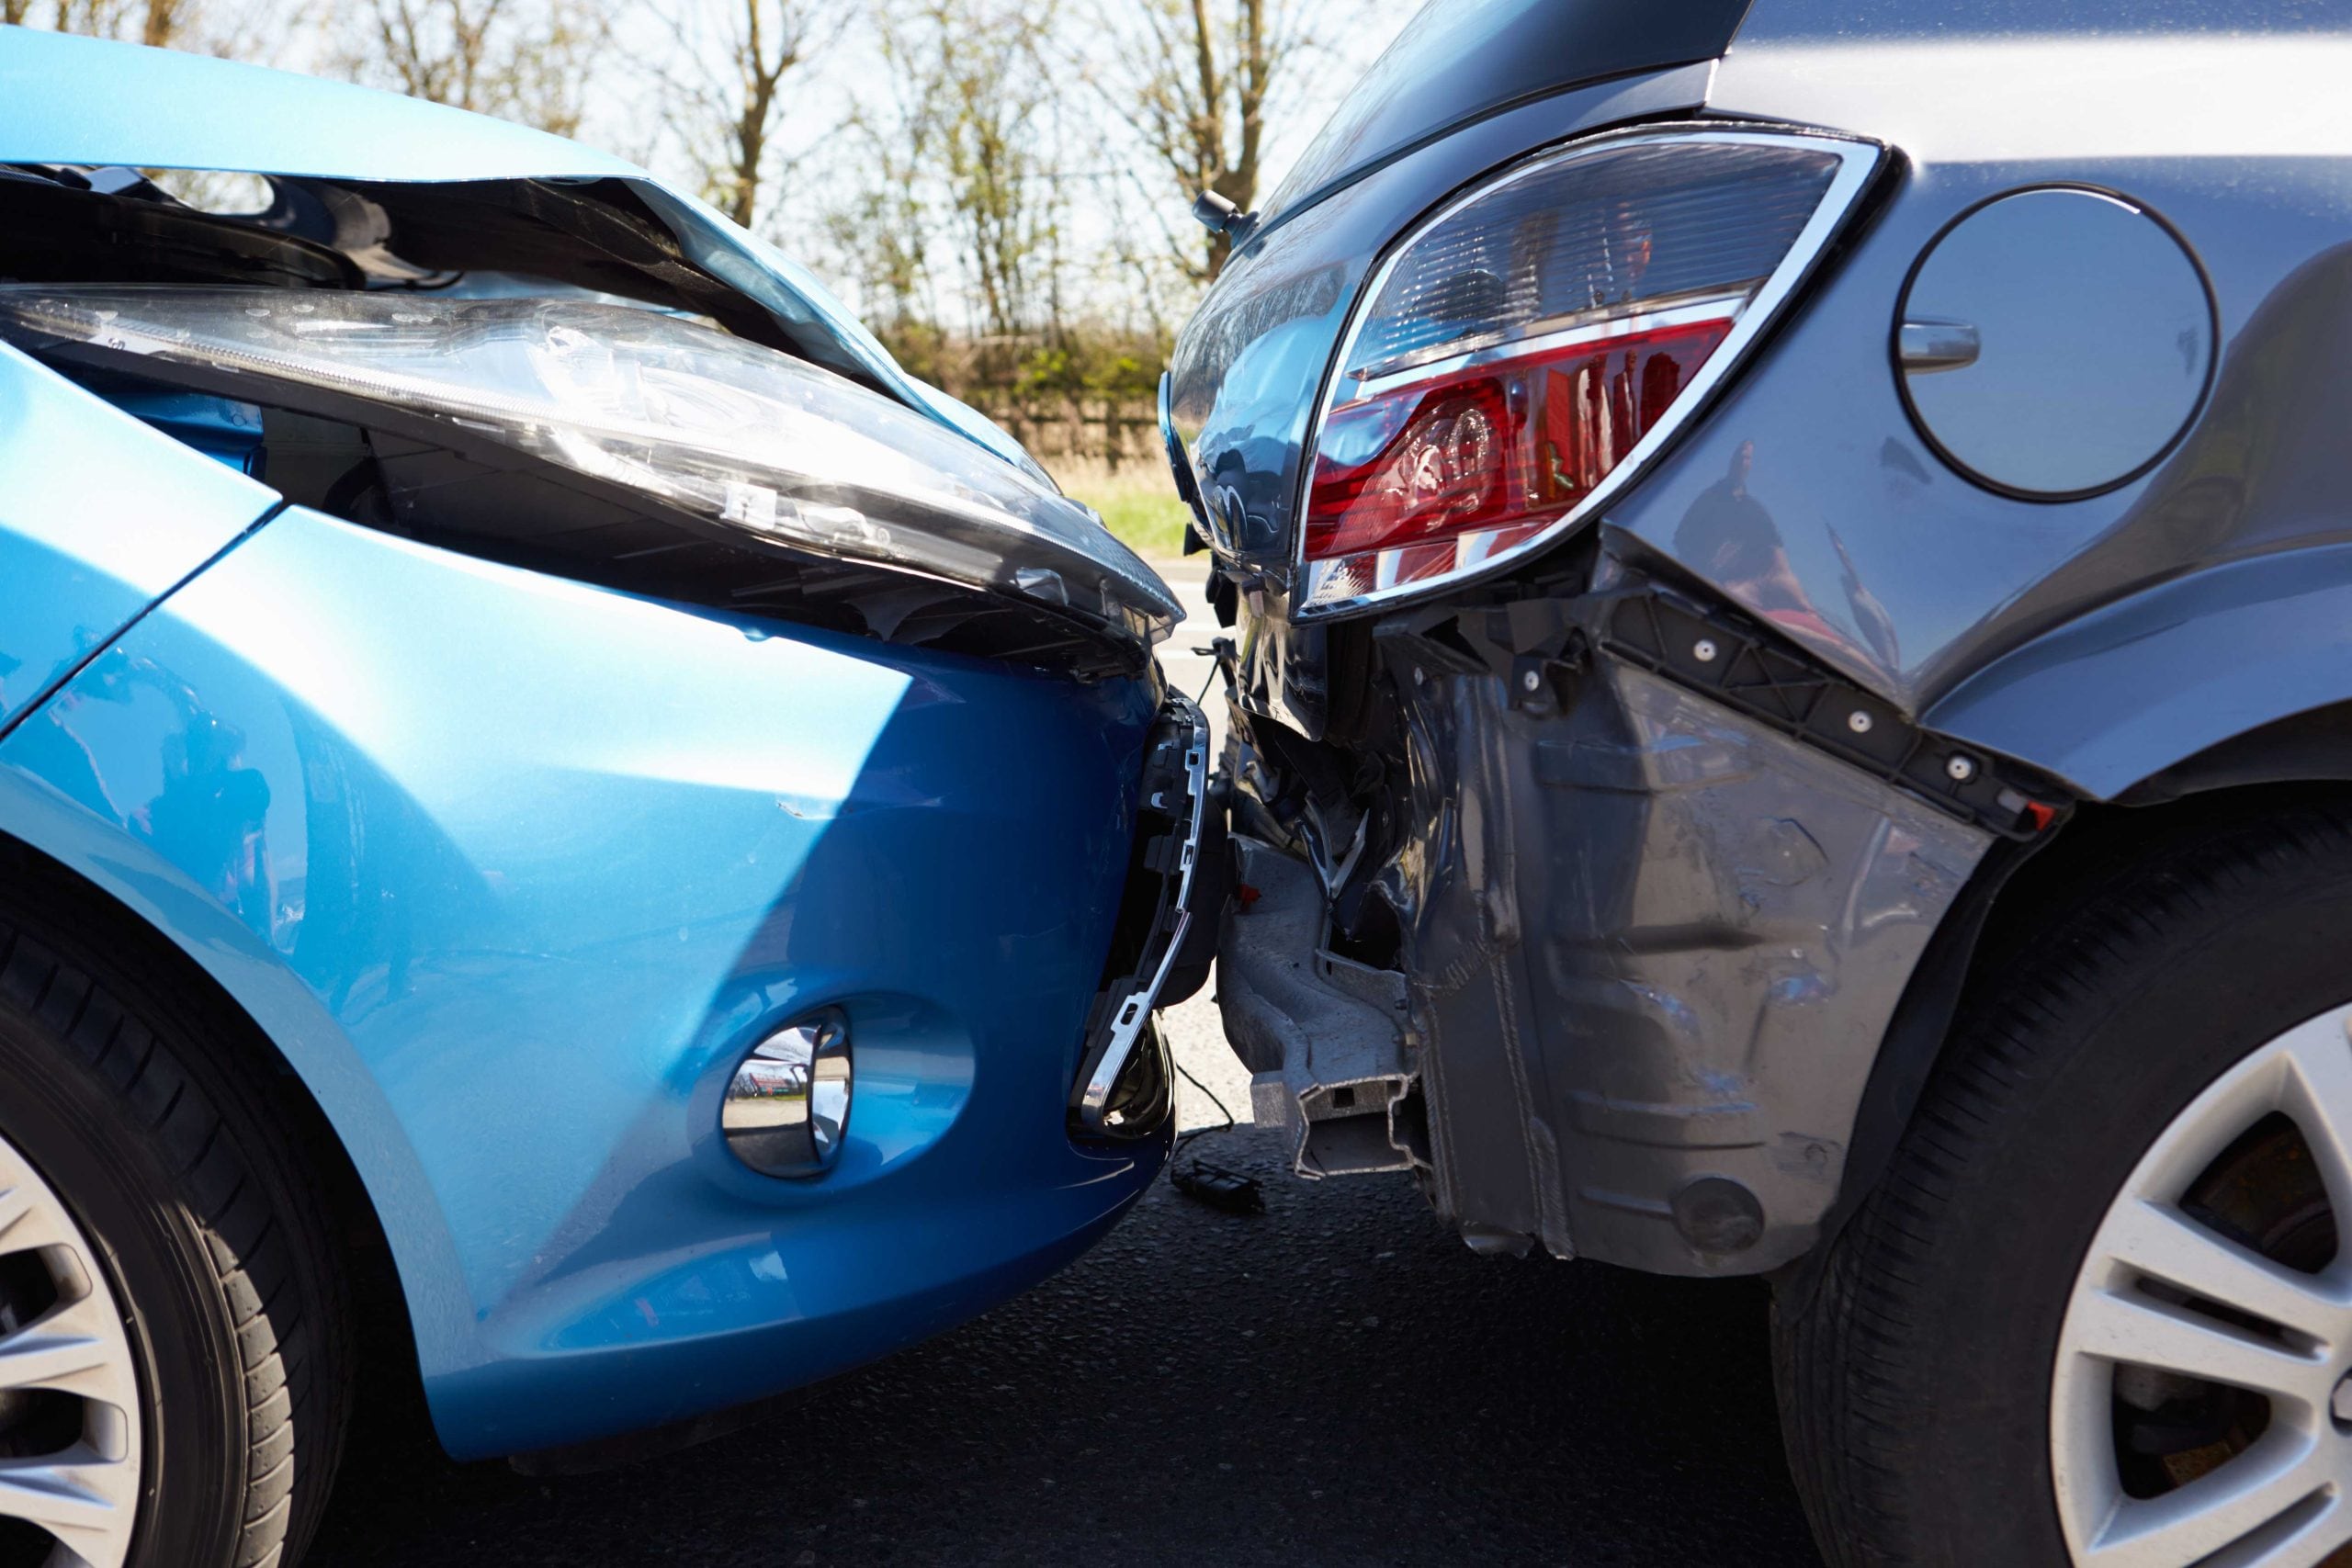 Understanding just what is SR22 Car Accident Insurance options for Atlanta residents